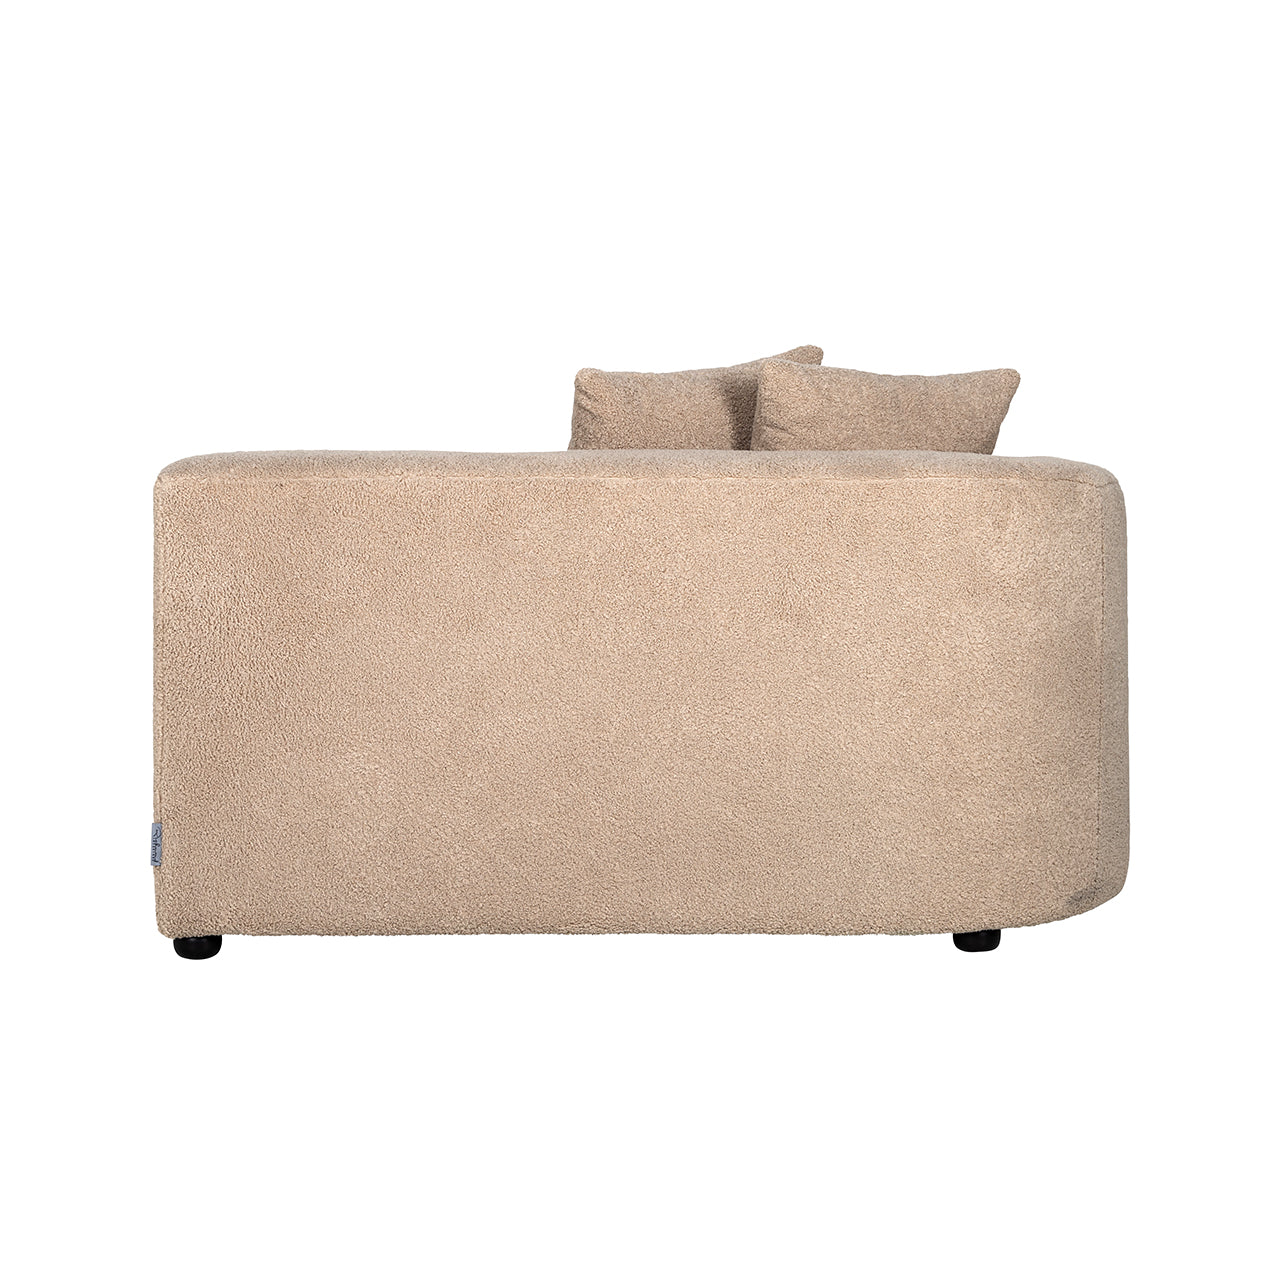 Sofa Grayson arm left sand furry | fully upholstered right (Himalaya 902 sand furry)